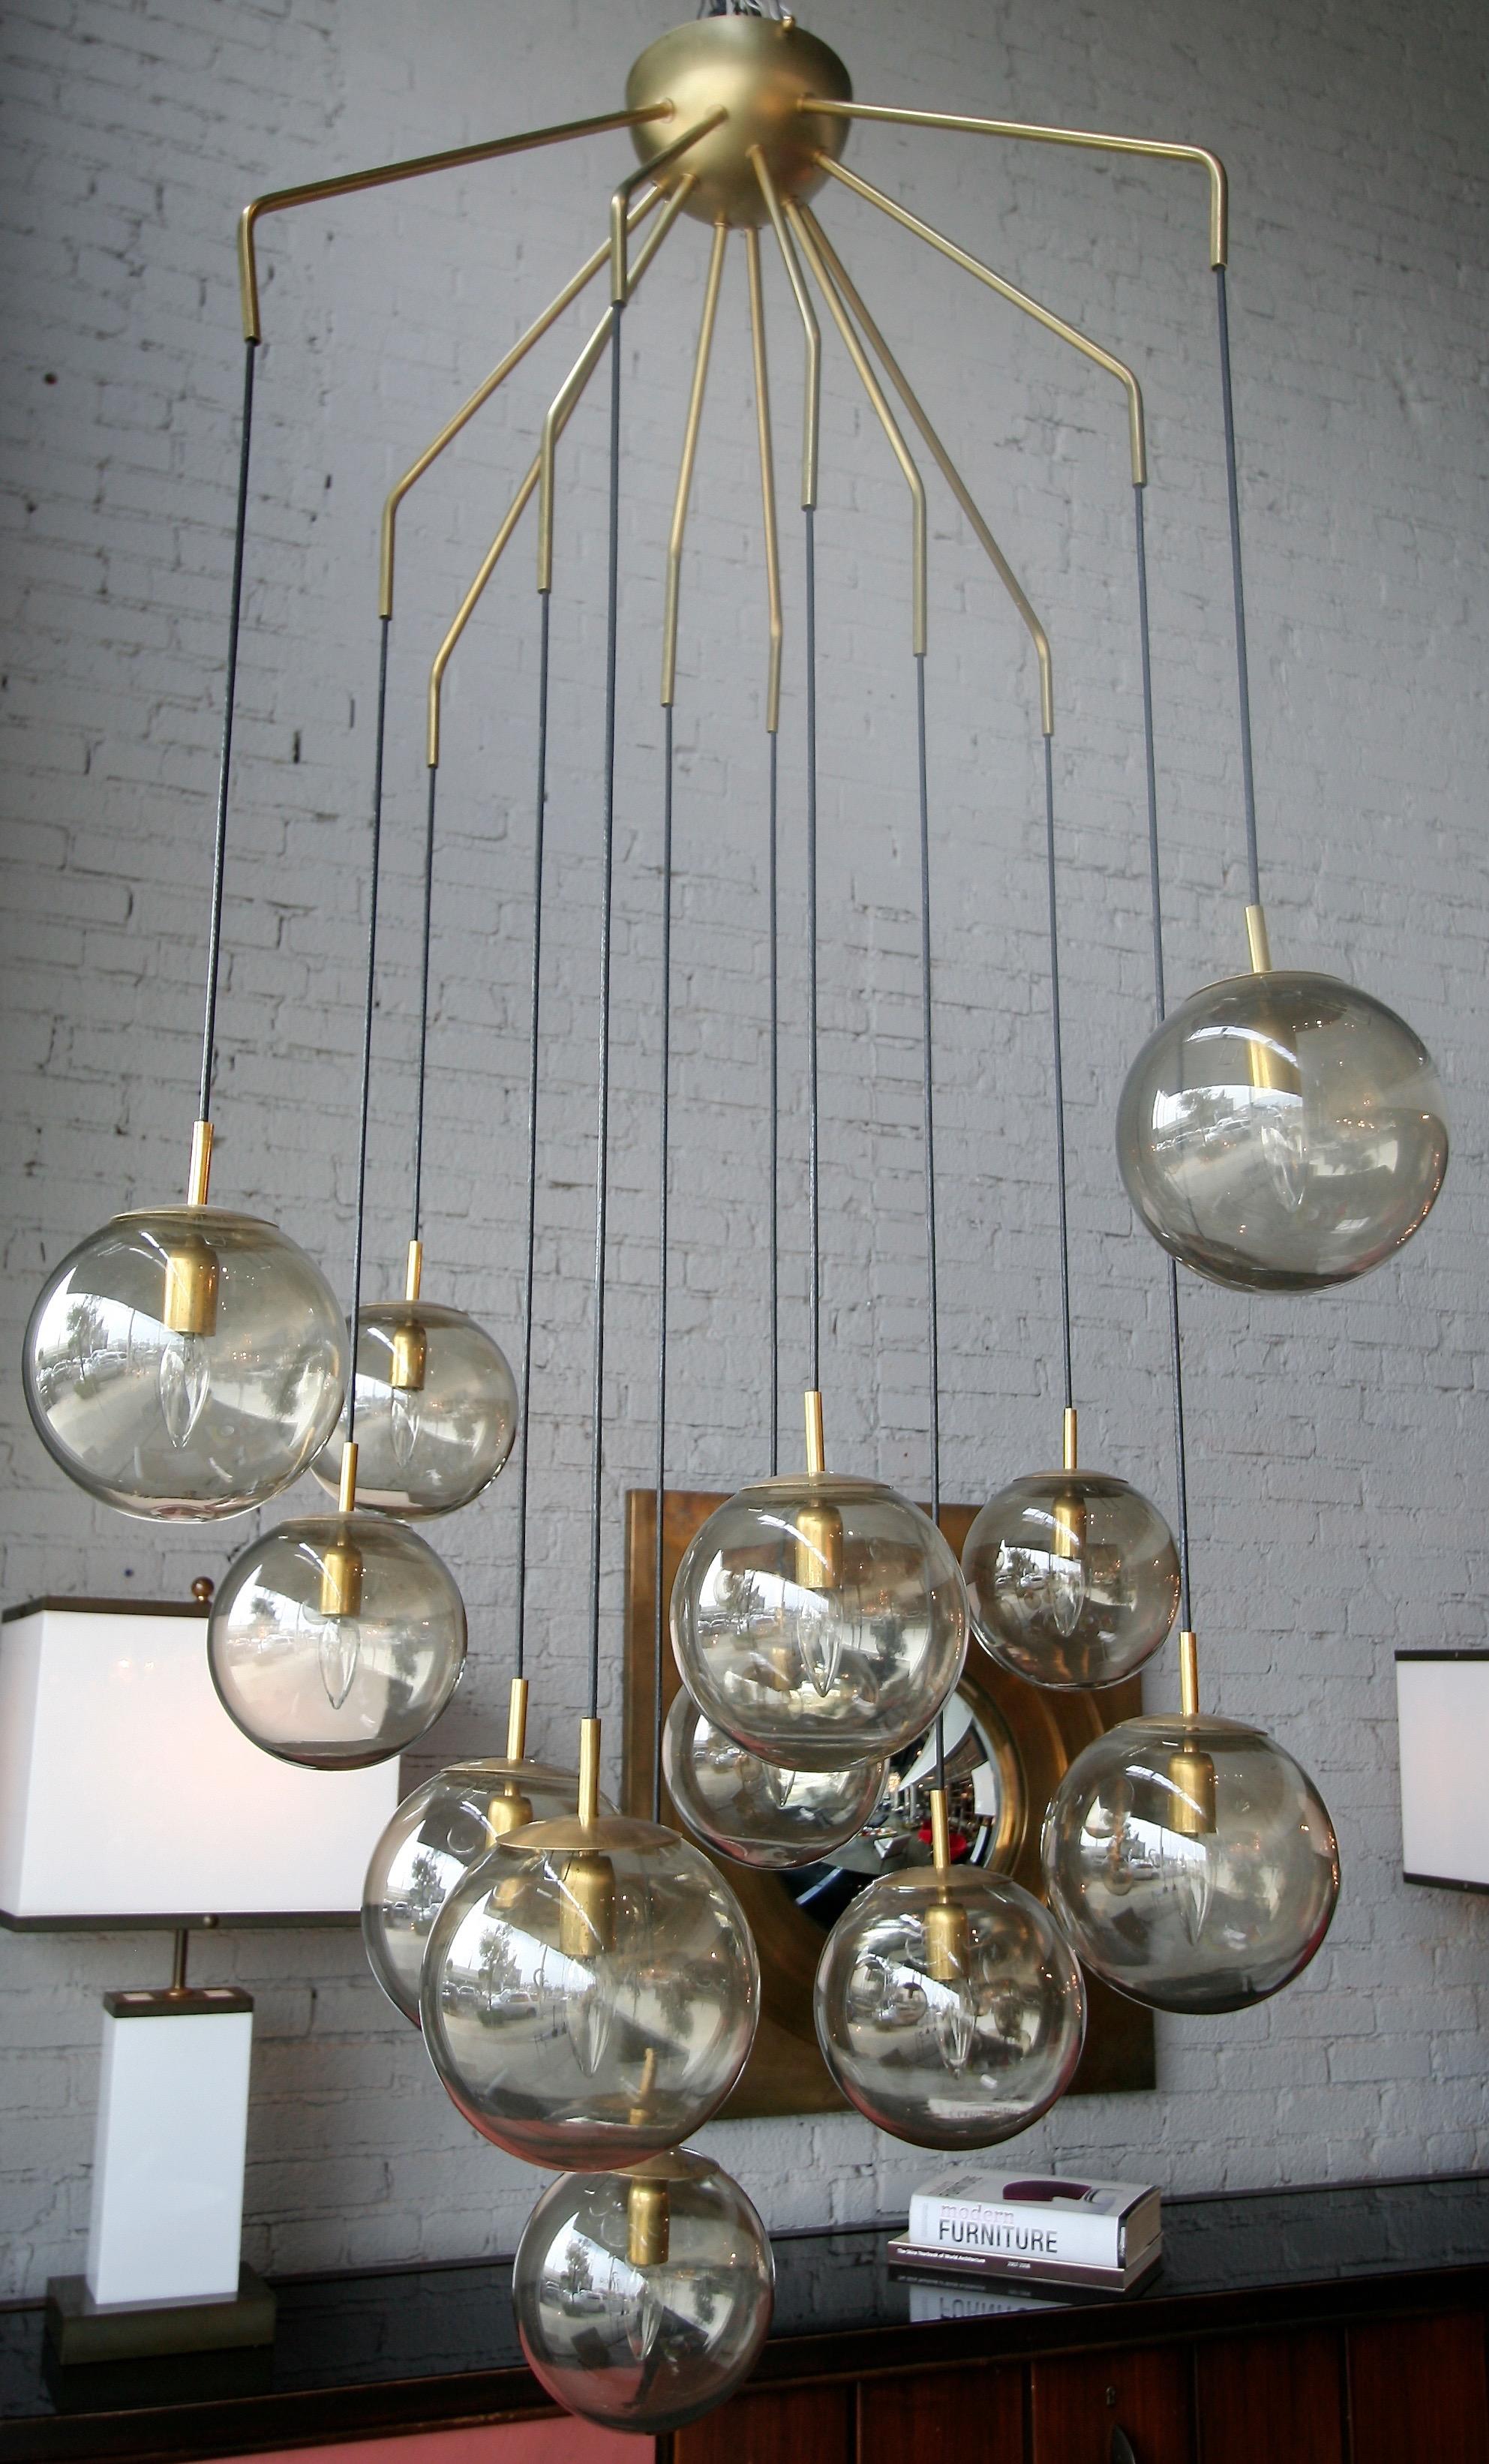 Custom Murano Mid-Century Modern style chandelier with 12 cascading smoked glass balls. Shipping from Italy not included in price.

 